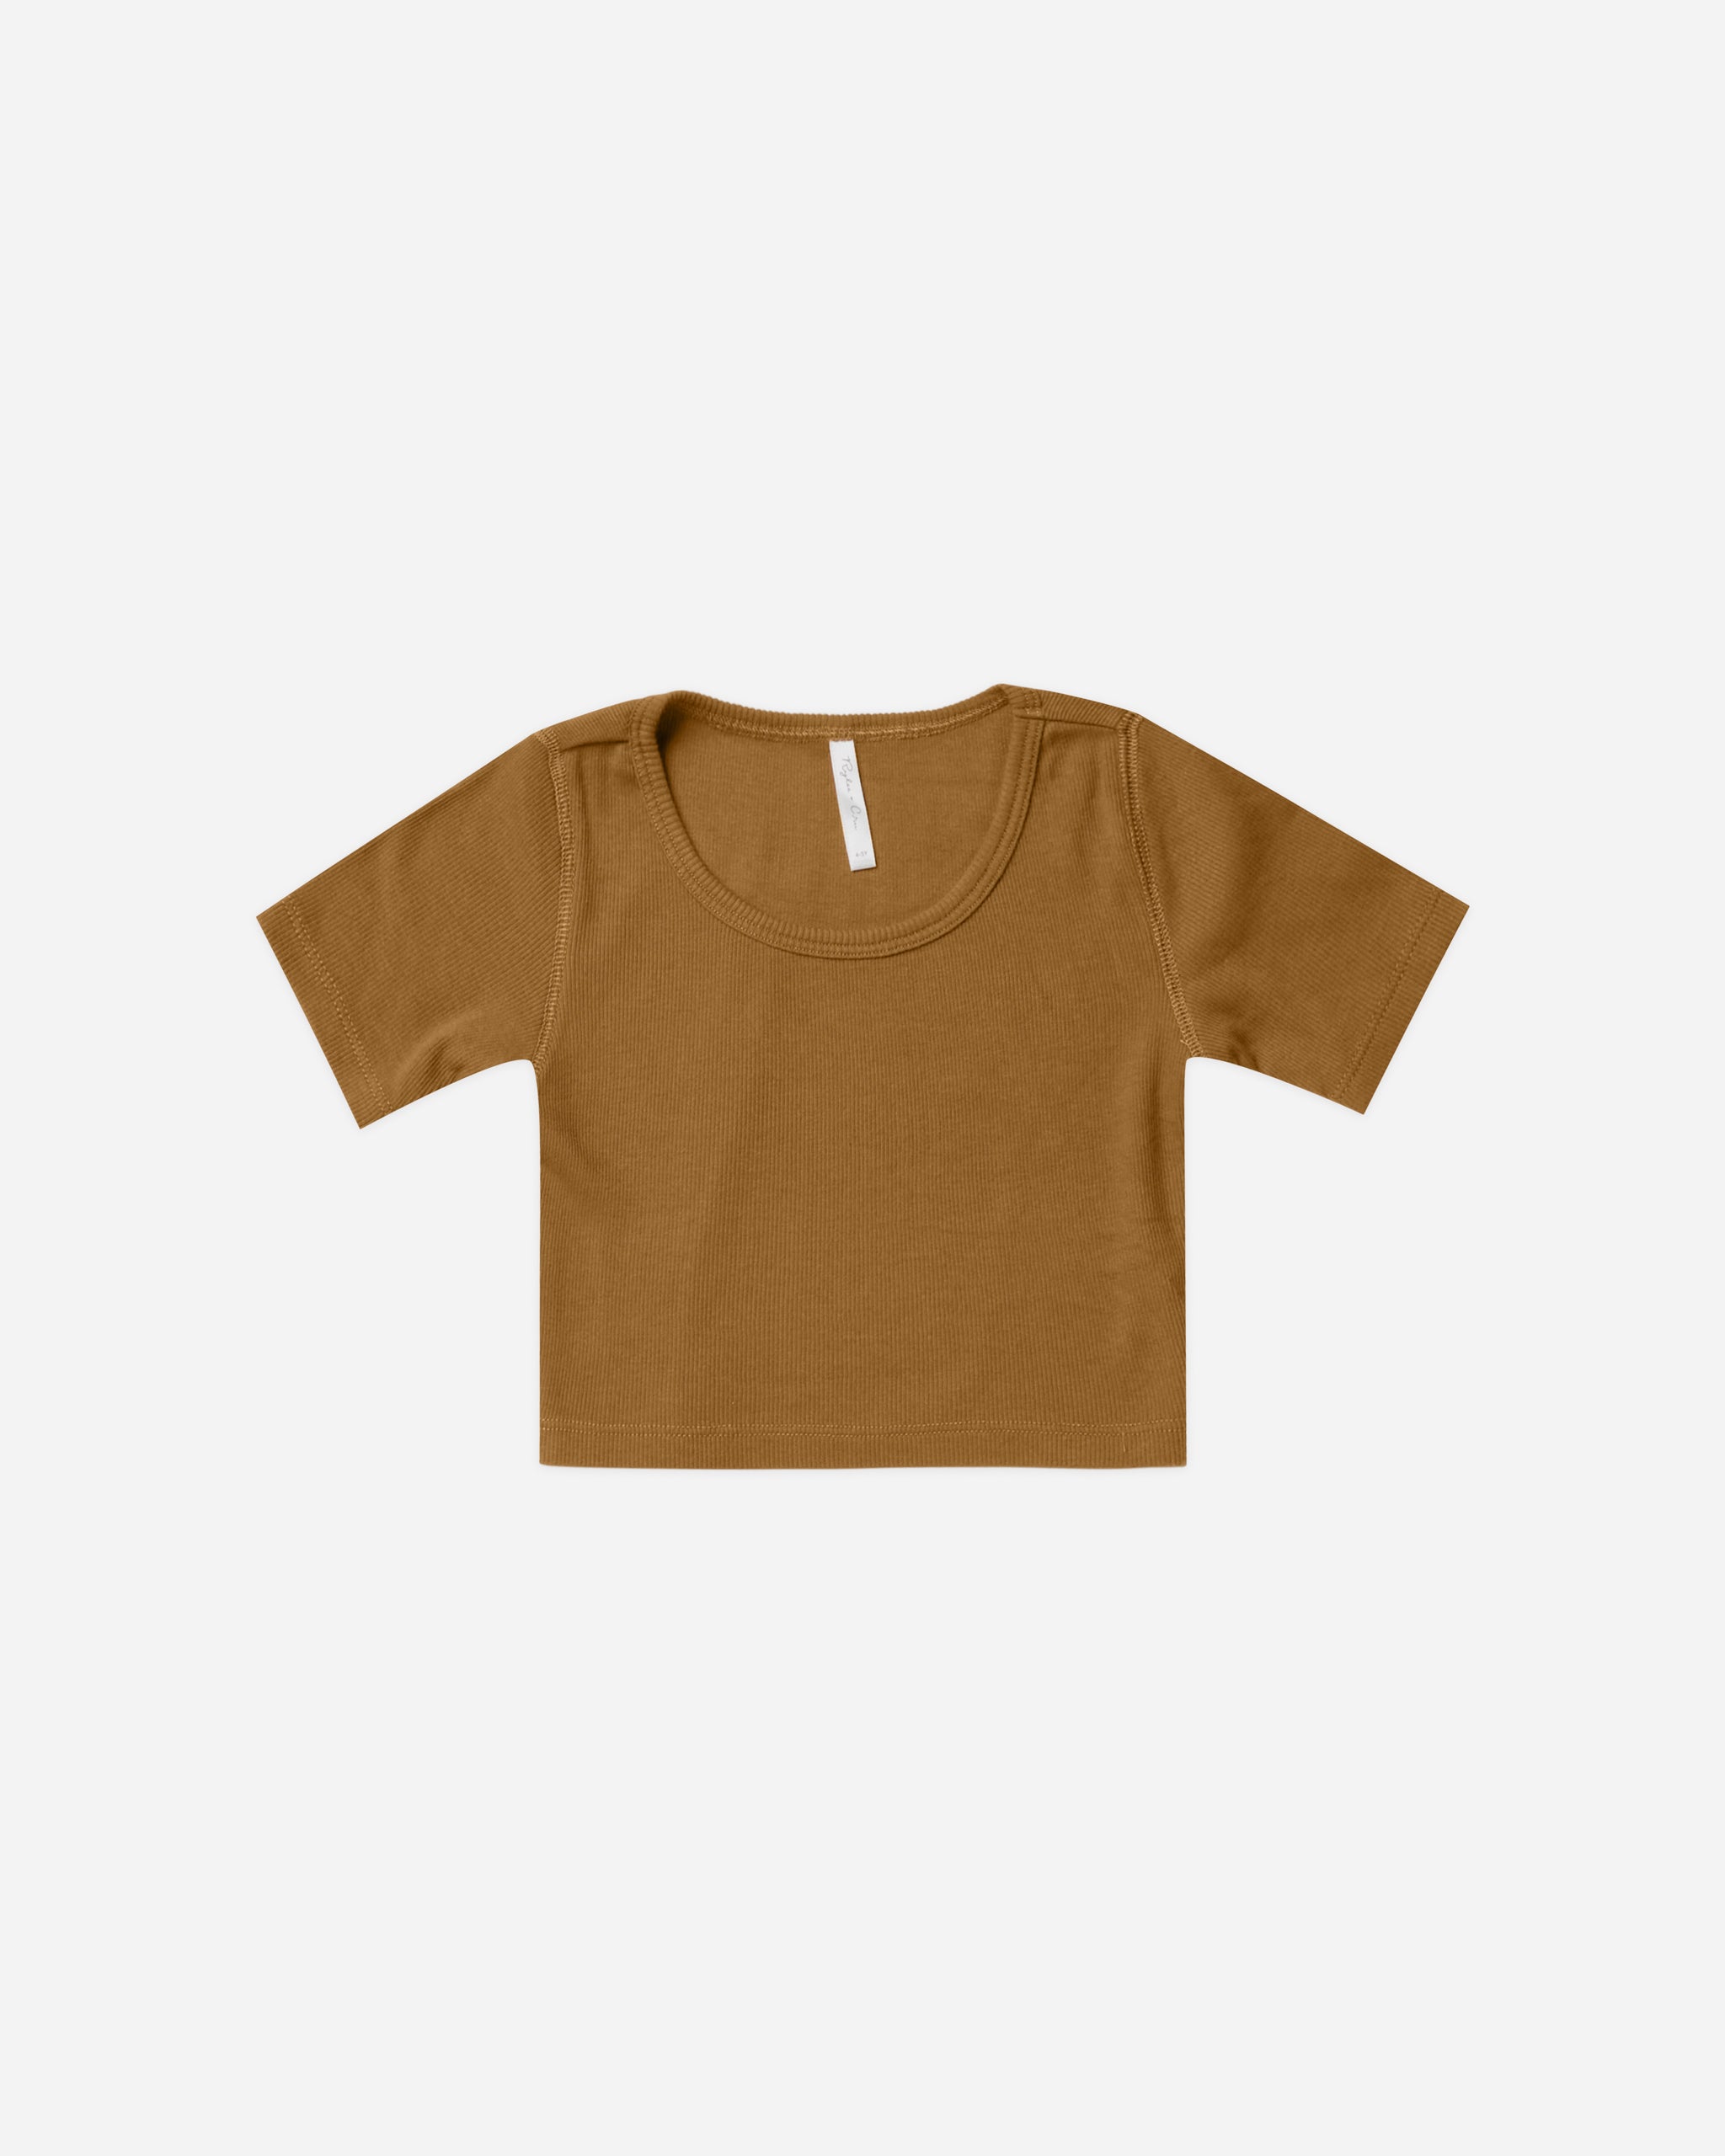 Ribbed Scoop Tee || Brass - Rylee + Cru | Kids Clothes | Trendy Baby Clothes | Modern Infant Outfits |